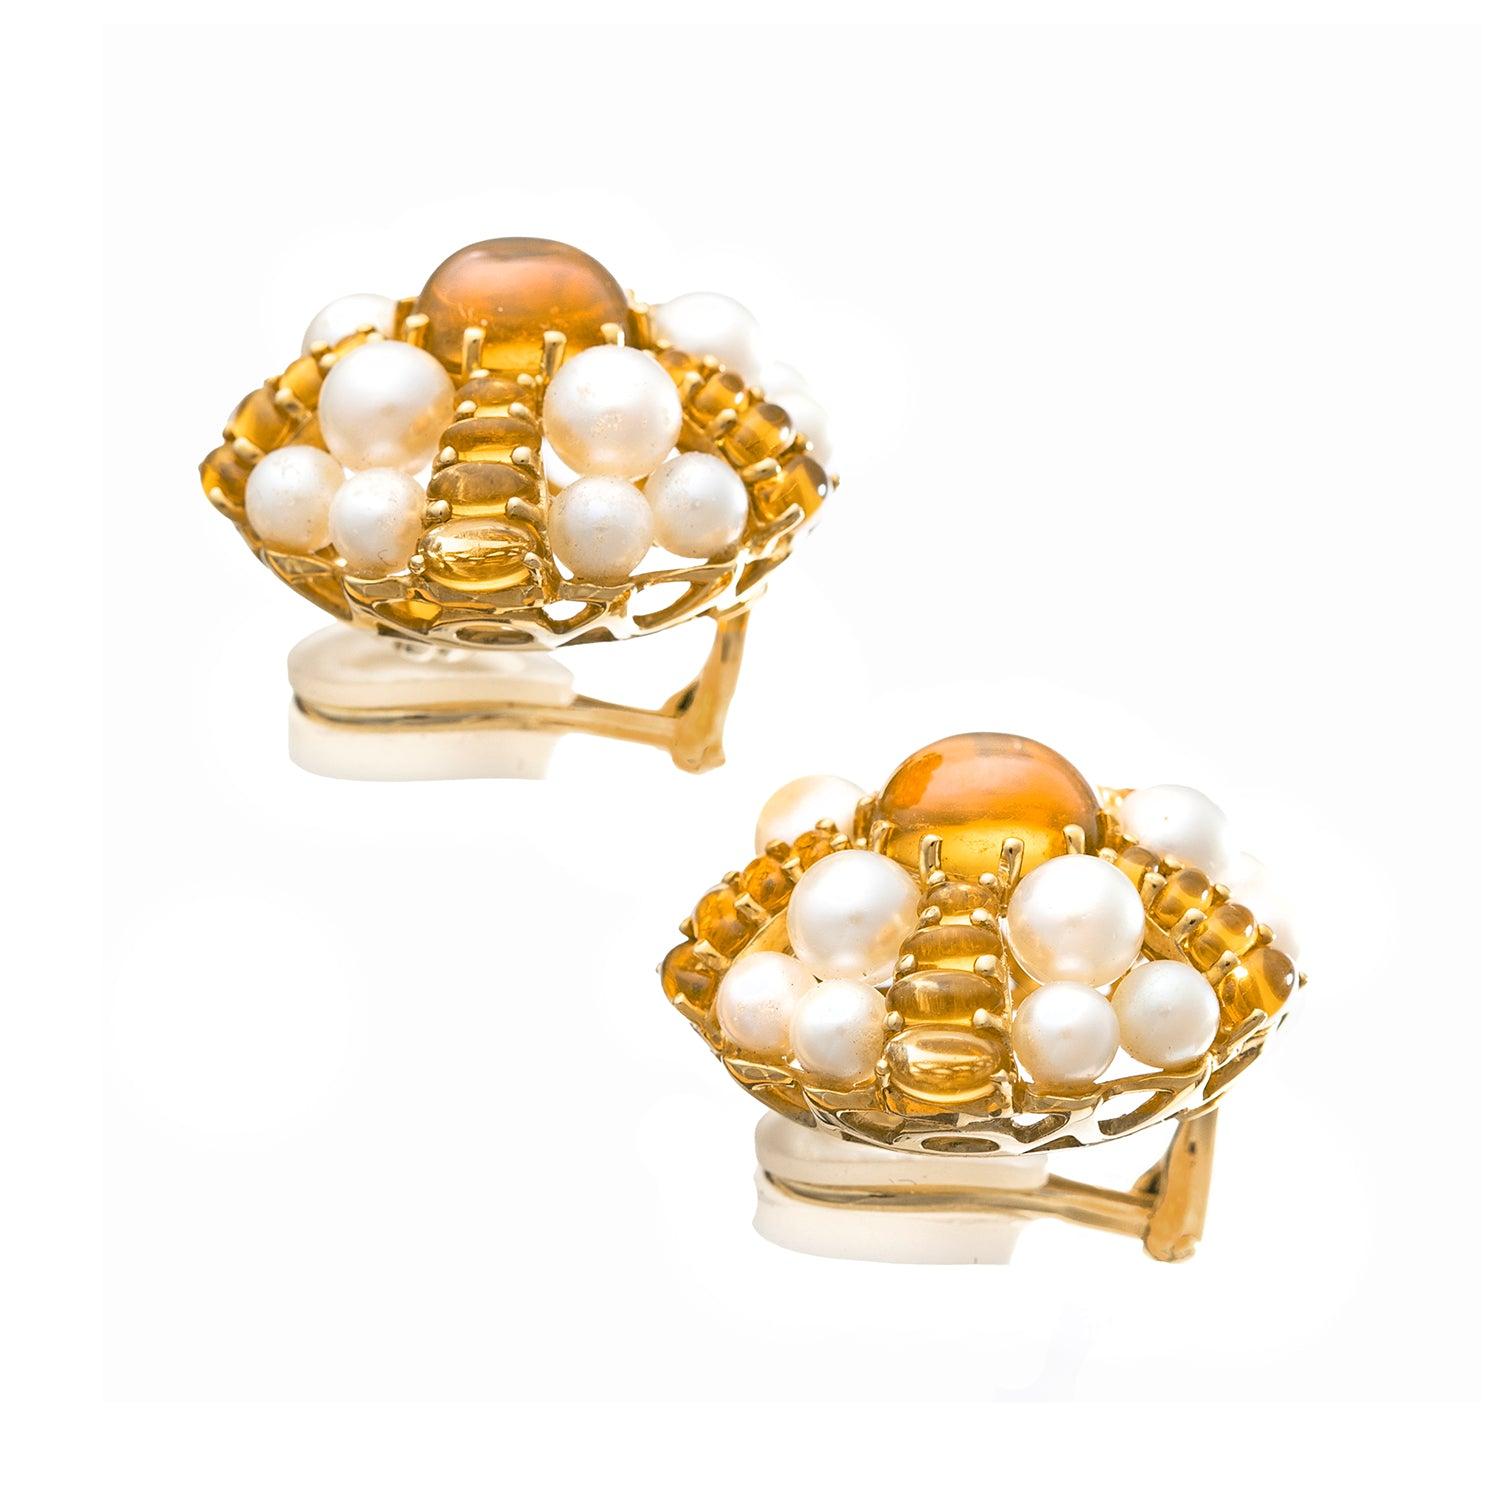 Sea urchin domed earrings in 18k yellow gold, centering a larger cabochon-cut citrine surrounded by descending rows of smaller cabochon-cut citrines and cultured pearls.

Clip-style French backs (posts may be added upon customer request).  Signed